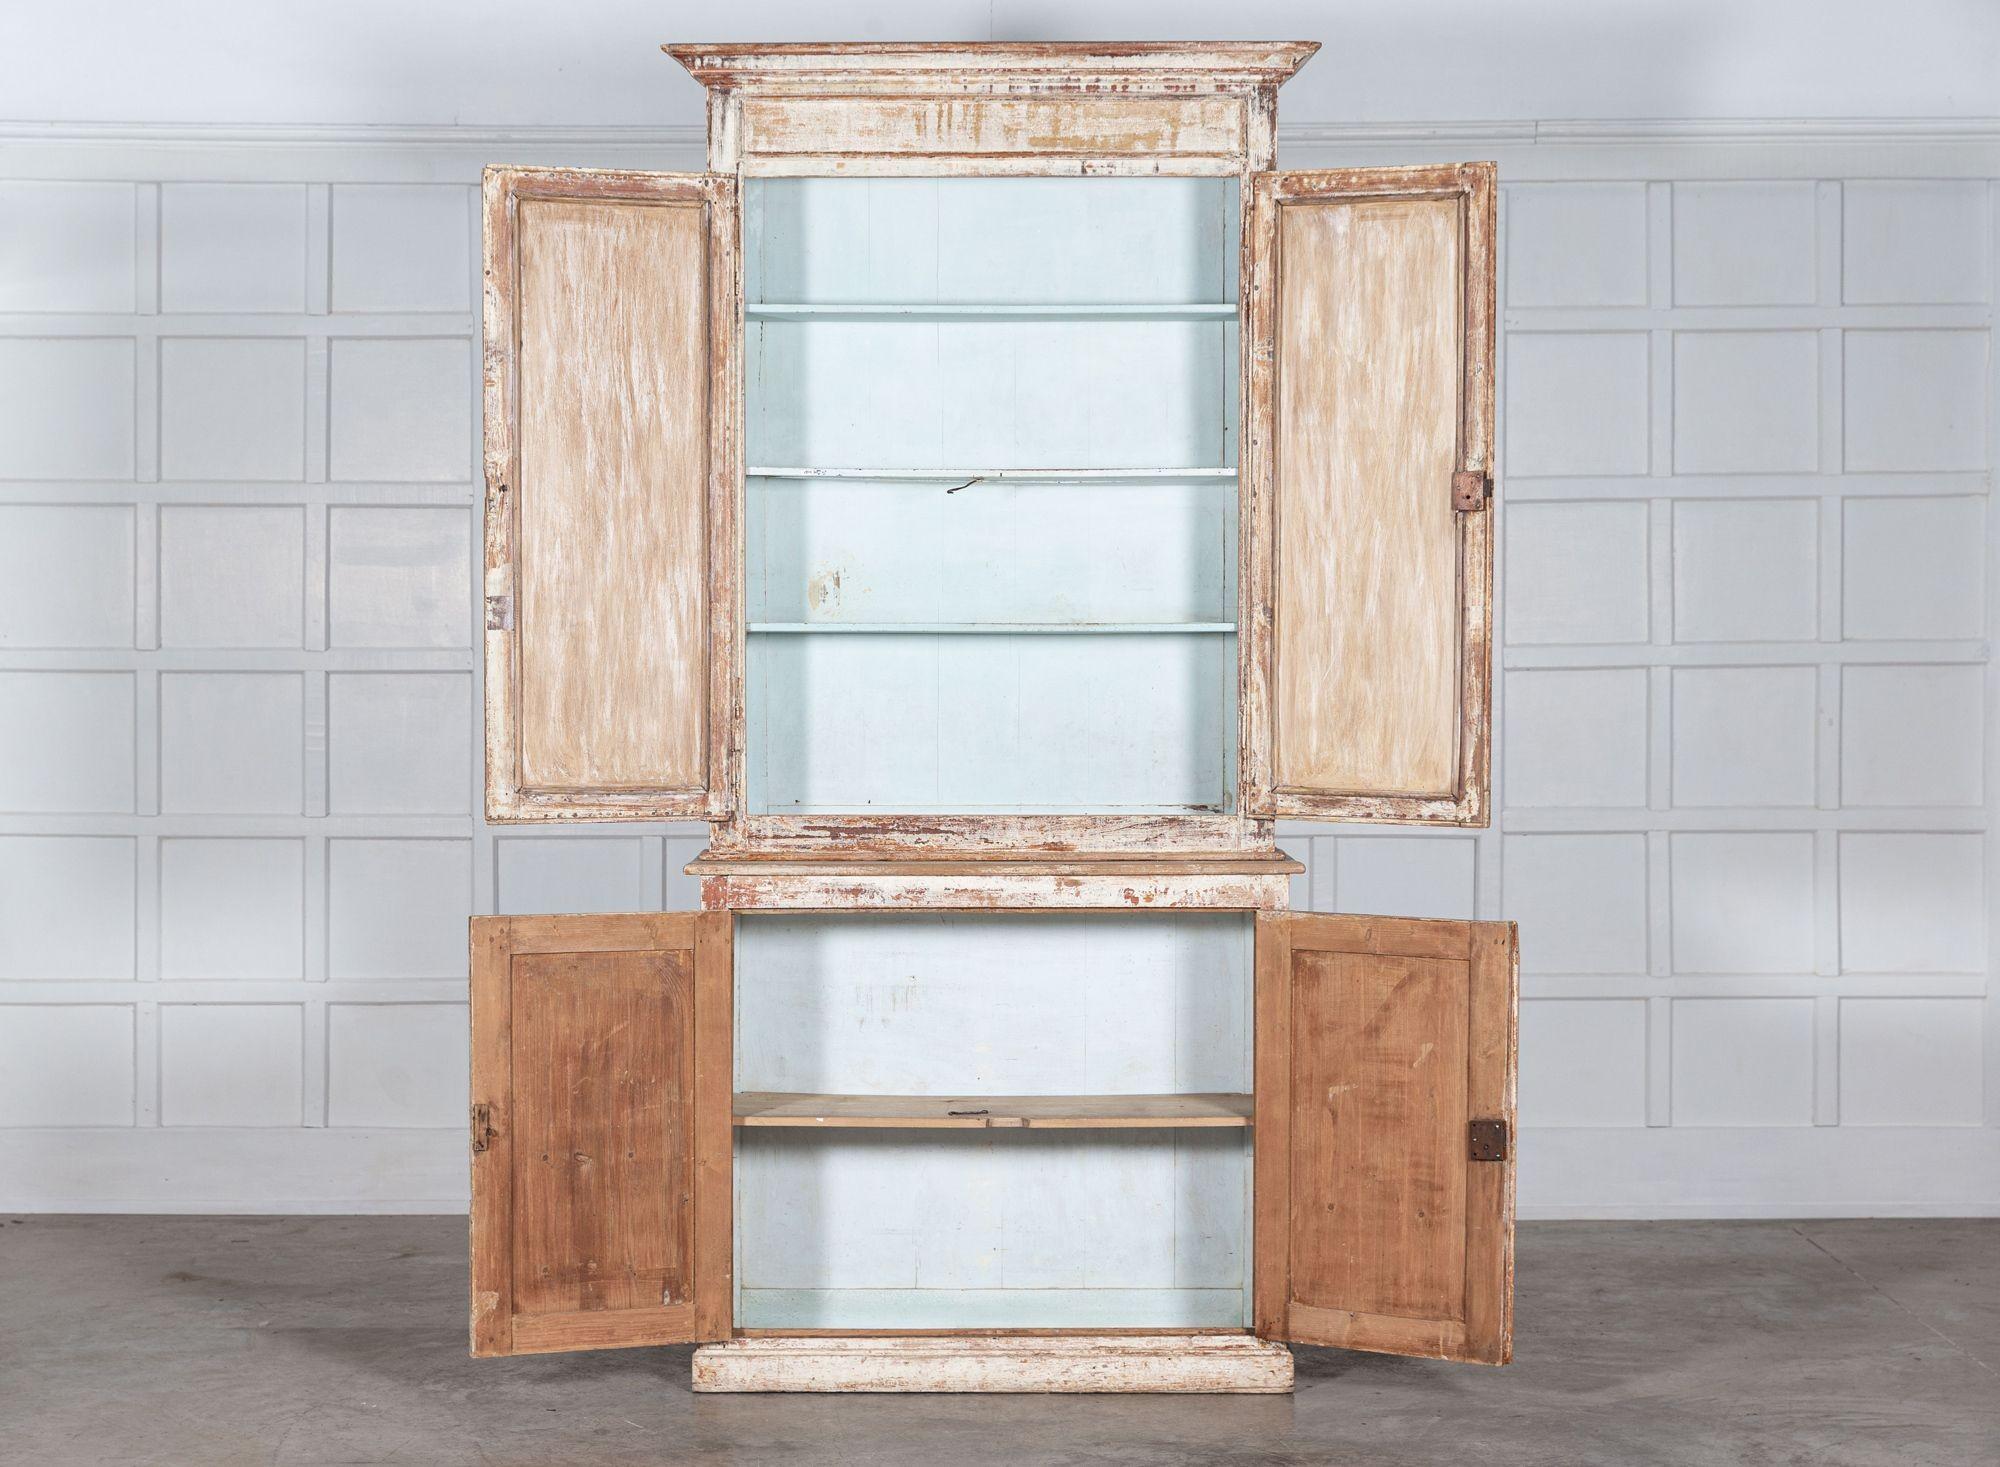 circa 1880
19thC Austrian Painted Mirrored Vitrine - Cabinet
Excellent scale, colour & patination
sku 1360
W119 x D44 x H252 cm
Top W119 x D37 x H152 cm
Base W115 x D44 x H100 cm